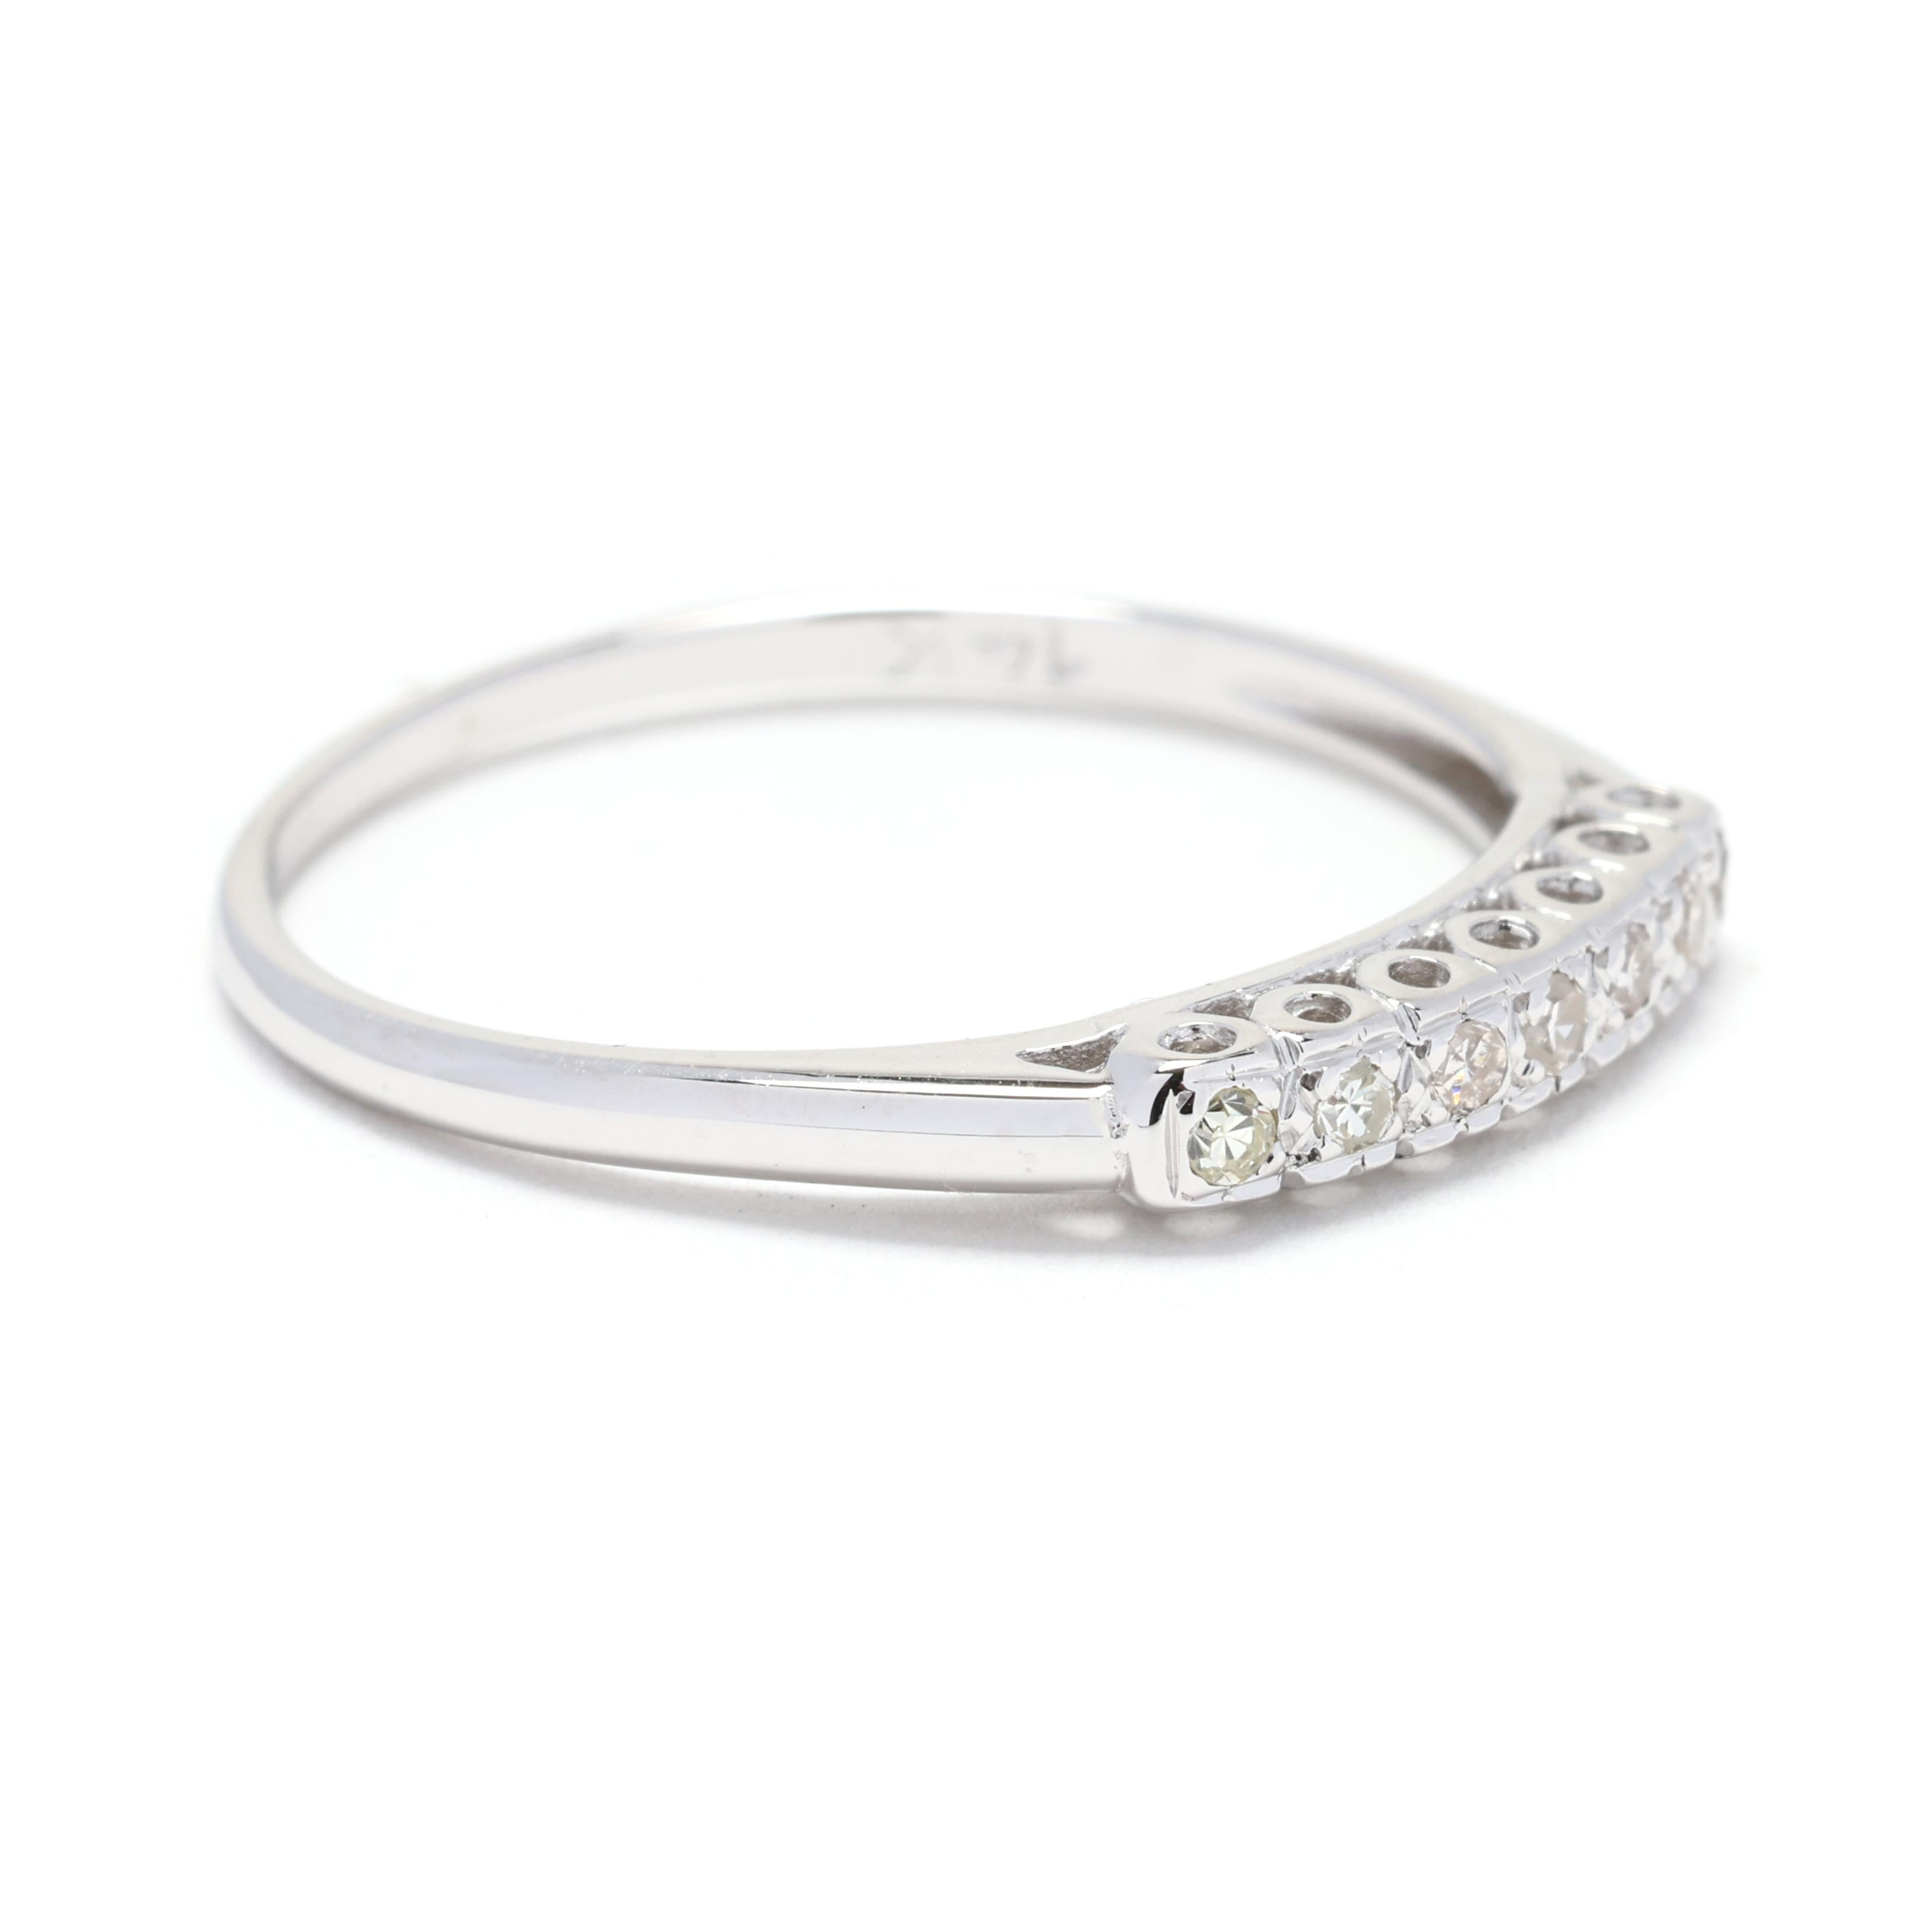 This stunning 0.05 carat total weight diamond wedding band is a beautiful symbol of your eternal love. Crafted in 14k white gold, this ring features a row of square-cut diamonds that are delicately prong-set for maximum sparkle and brilliance. The